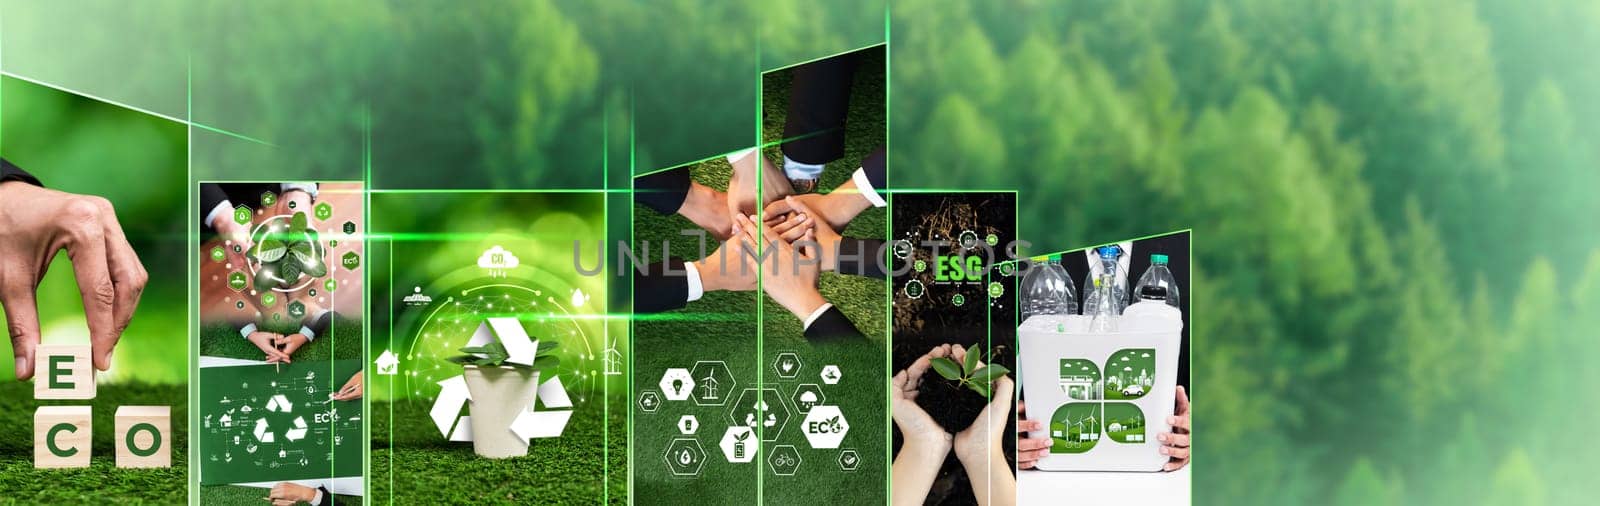 Green business ESG management tool to save world future concept model case idea to deal with bio carbon waste cycle data for better day of city life while building jobs, money, LCA tax and profit .